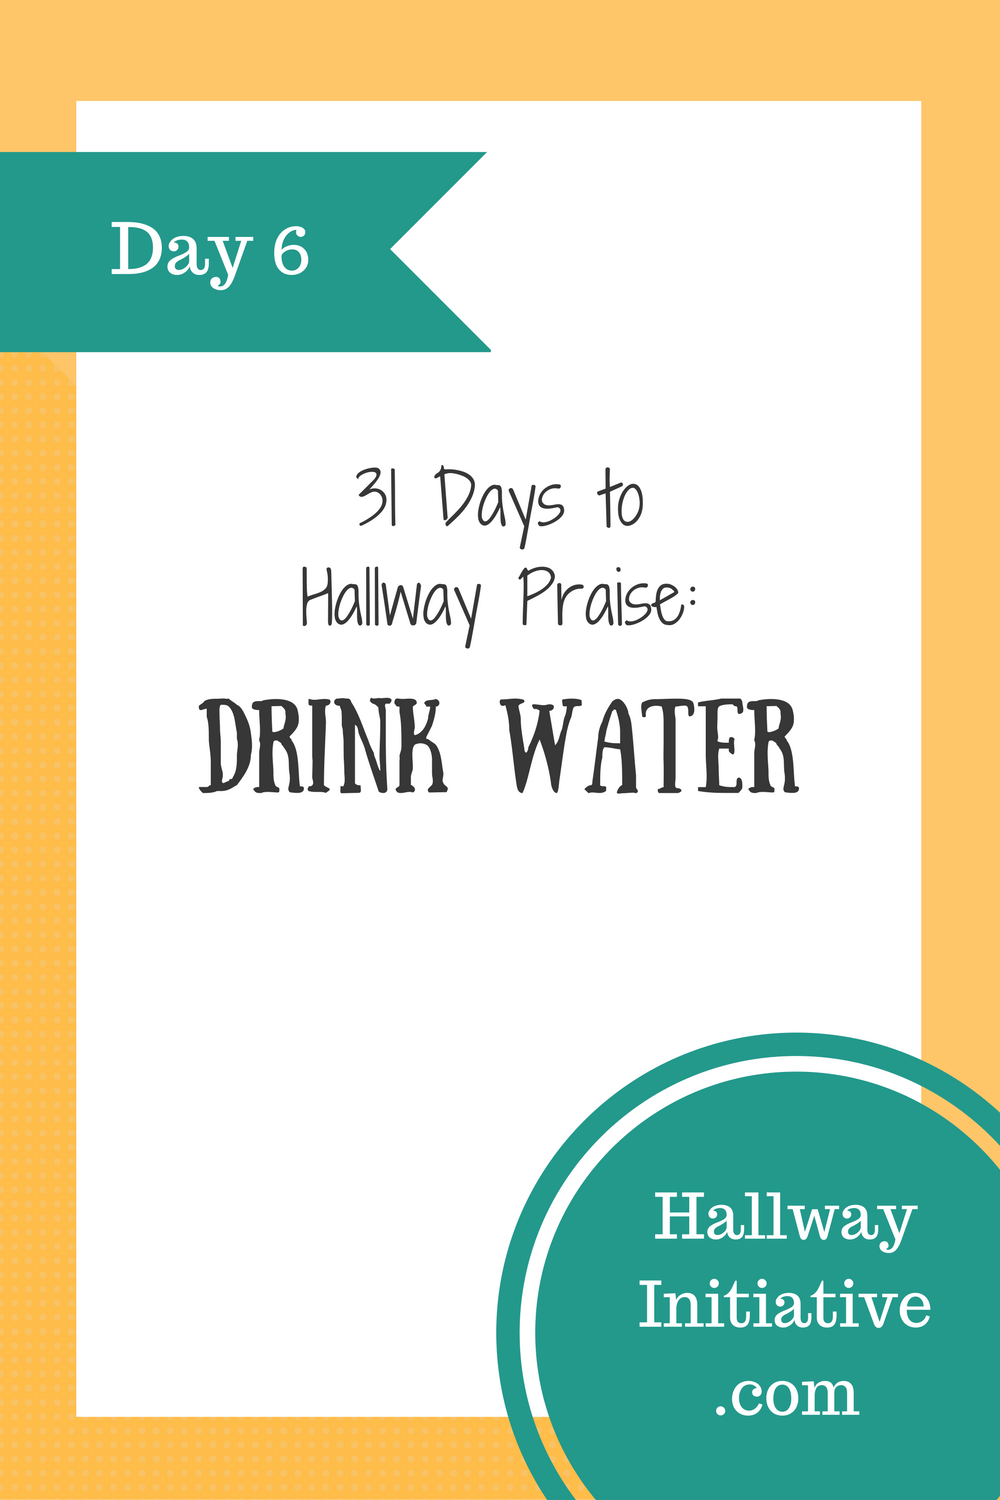 Day 6: drink water